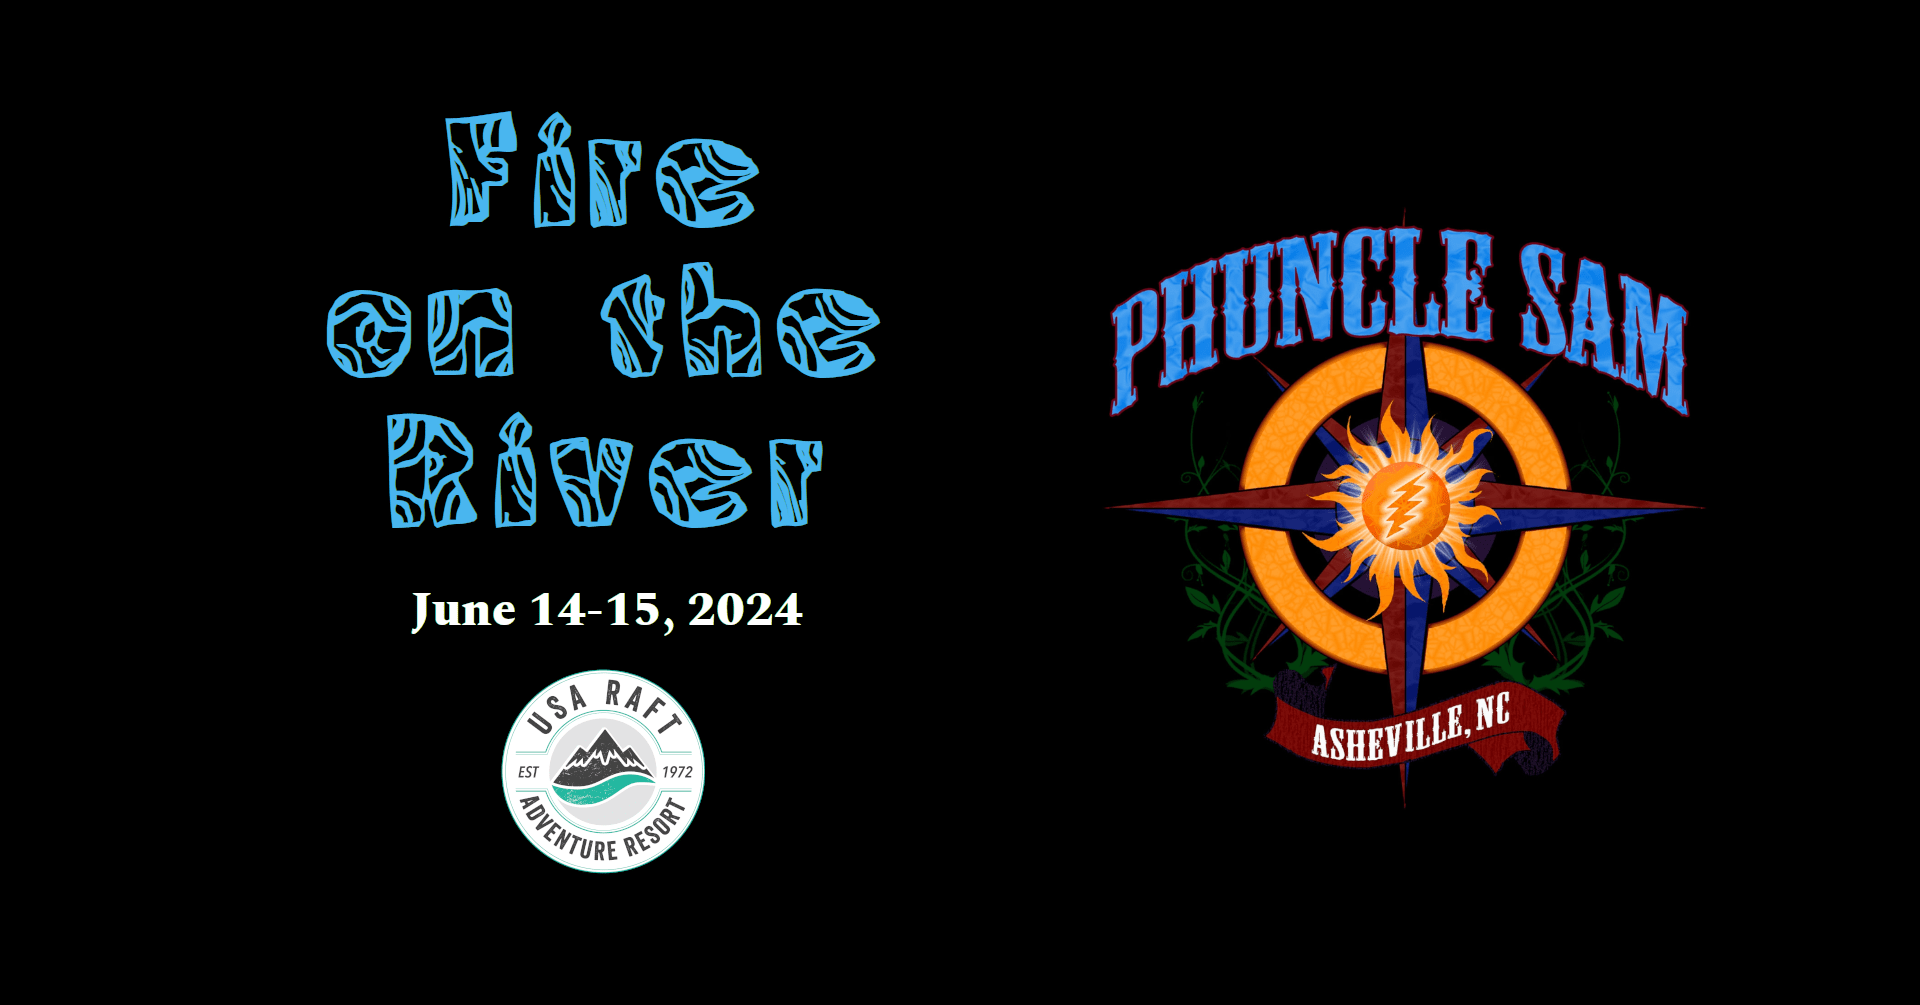 Fire on the River with Phuncle Sam (Asheville's oldest Grateful Dead Tribute Band) on June 14-15, 2024